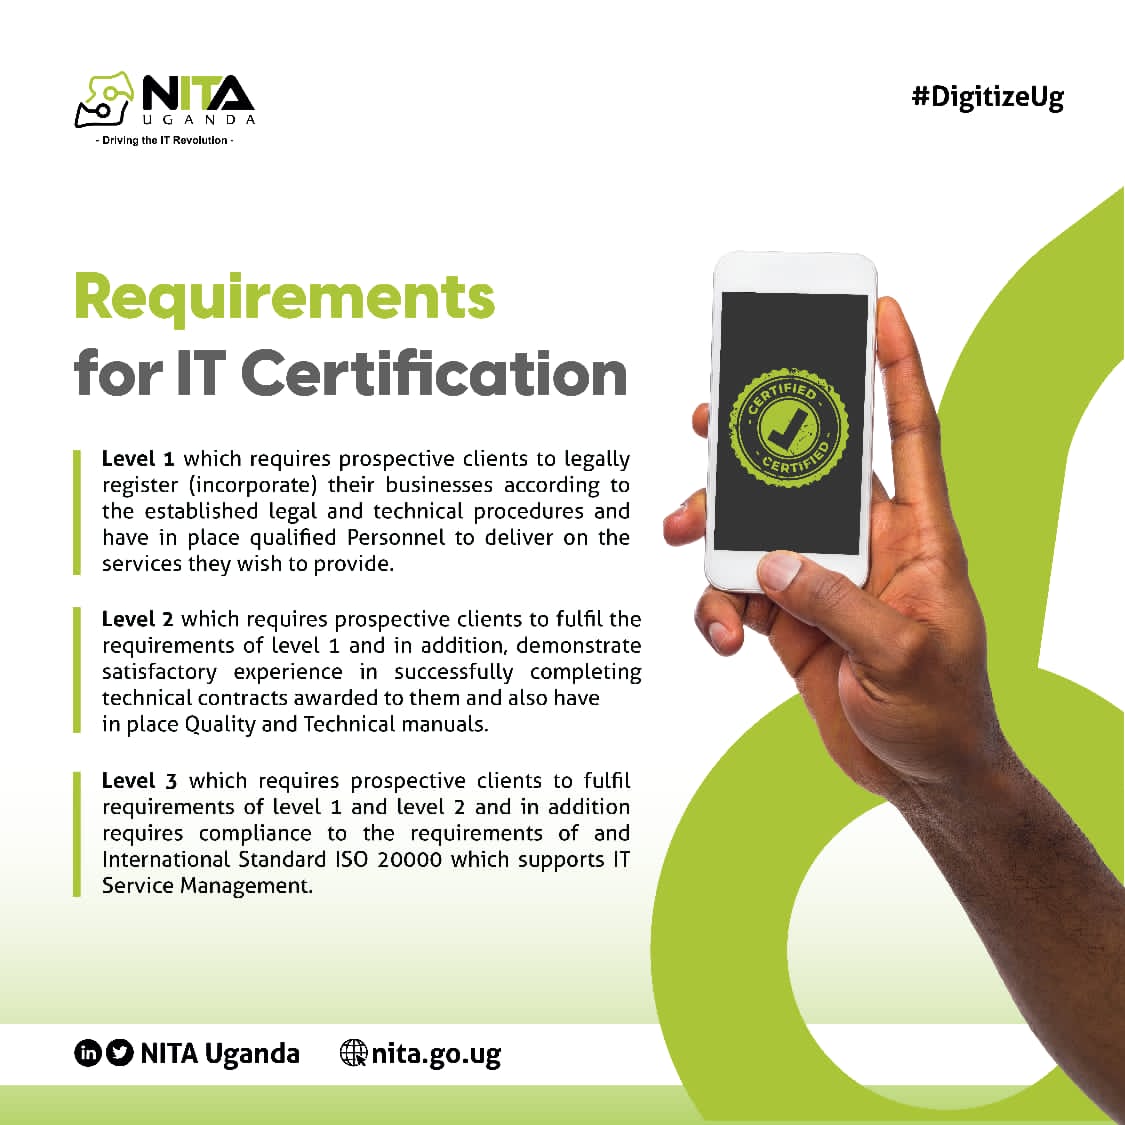 For all IT service providers please find below the requirements for IT Certification. For more information about IT certification visit: itco.nita.go.ug/certification_… #DigitizeUG